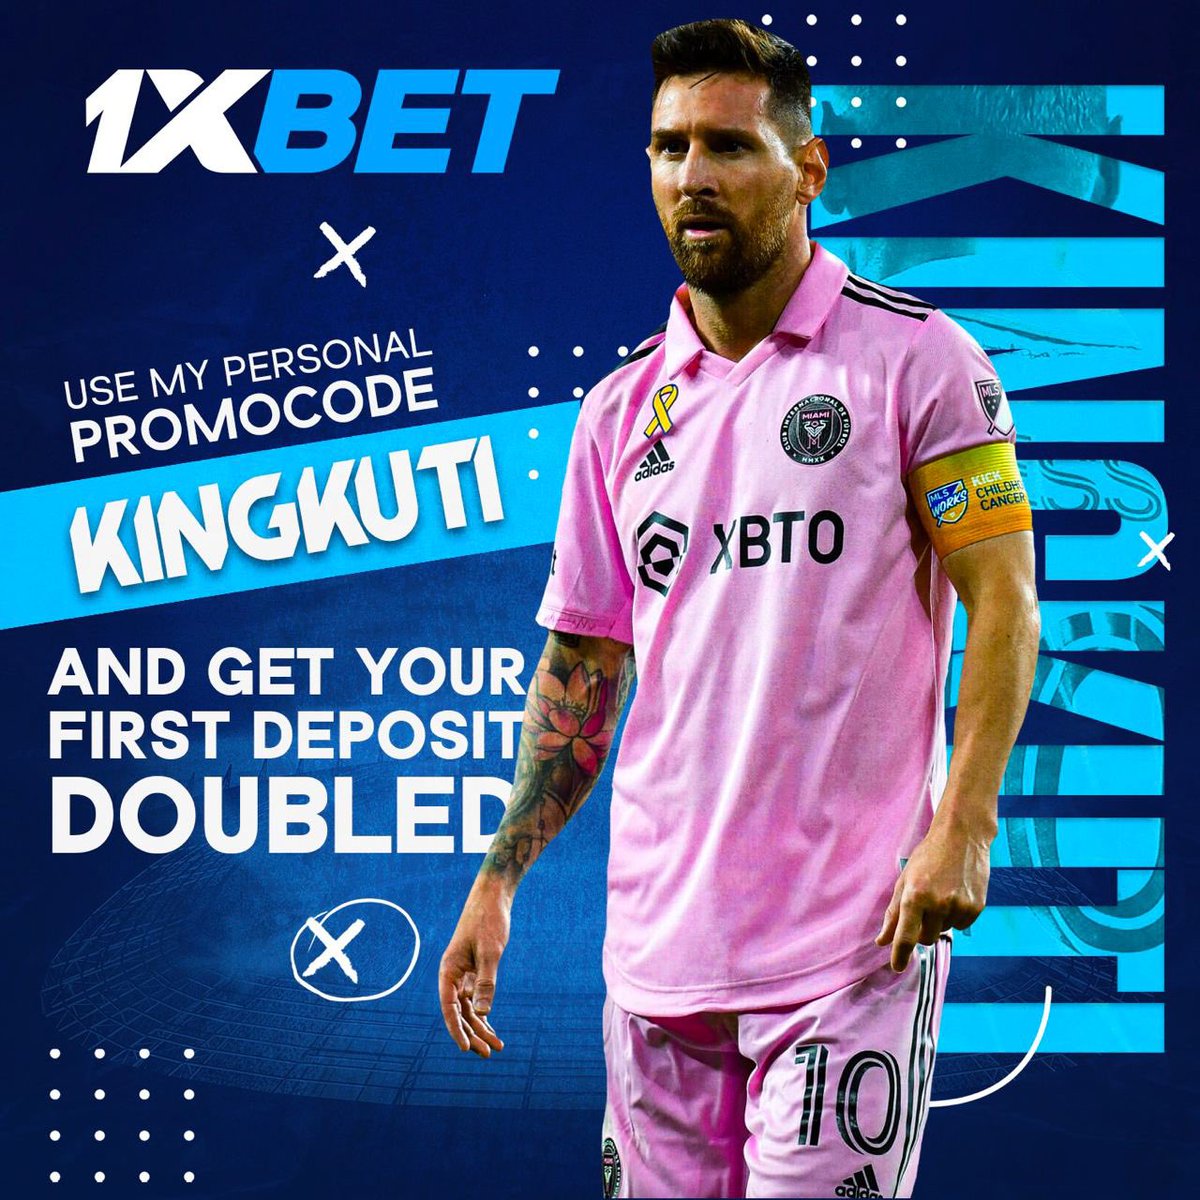 Today’s game on @1xBet_Eng Code 👉👉 SDT7A Have you registered on 1xbet yet?? Register now using this link below to get 100% welcome bonus 👇👇 tinyurl.com/y9dyjcc8 Promo code 👉 KINGKUTI